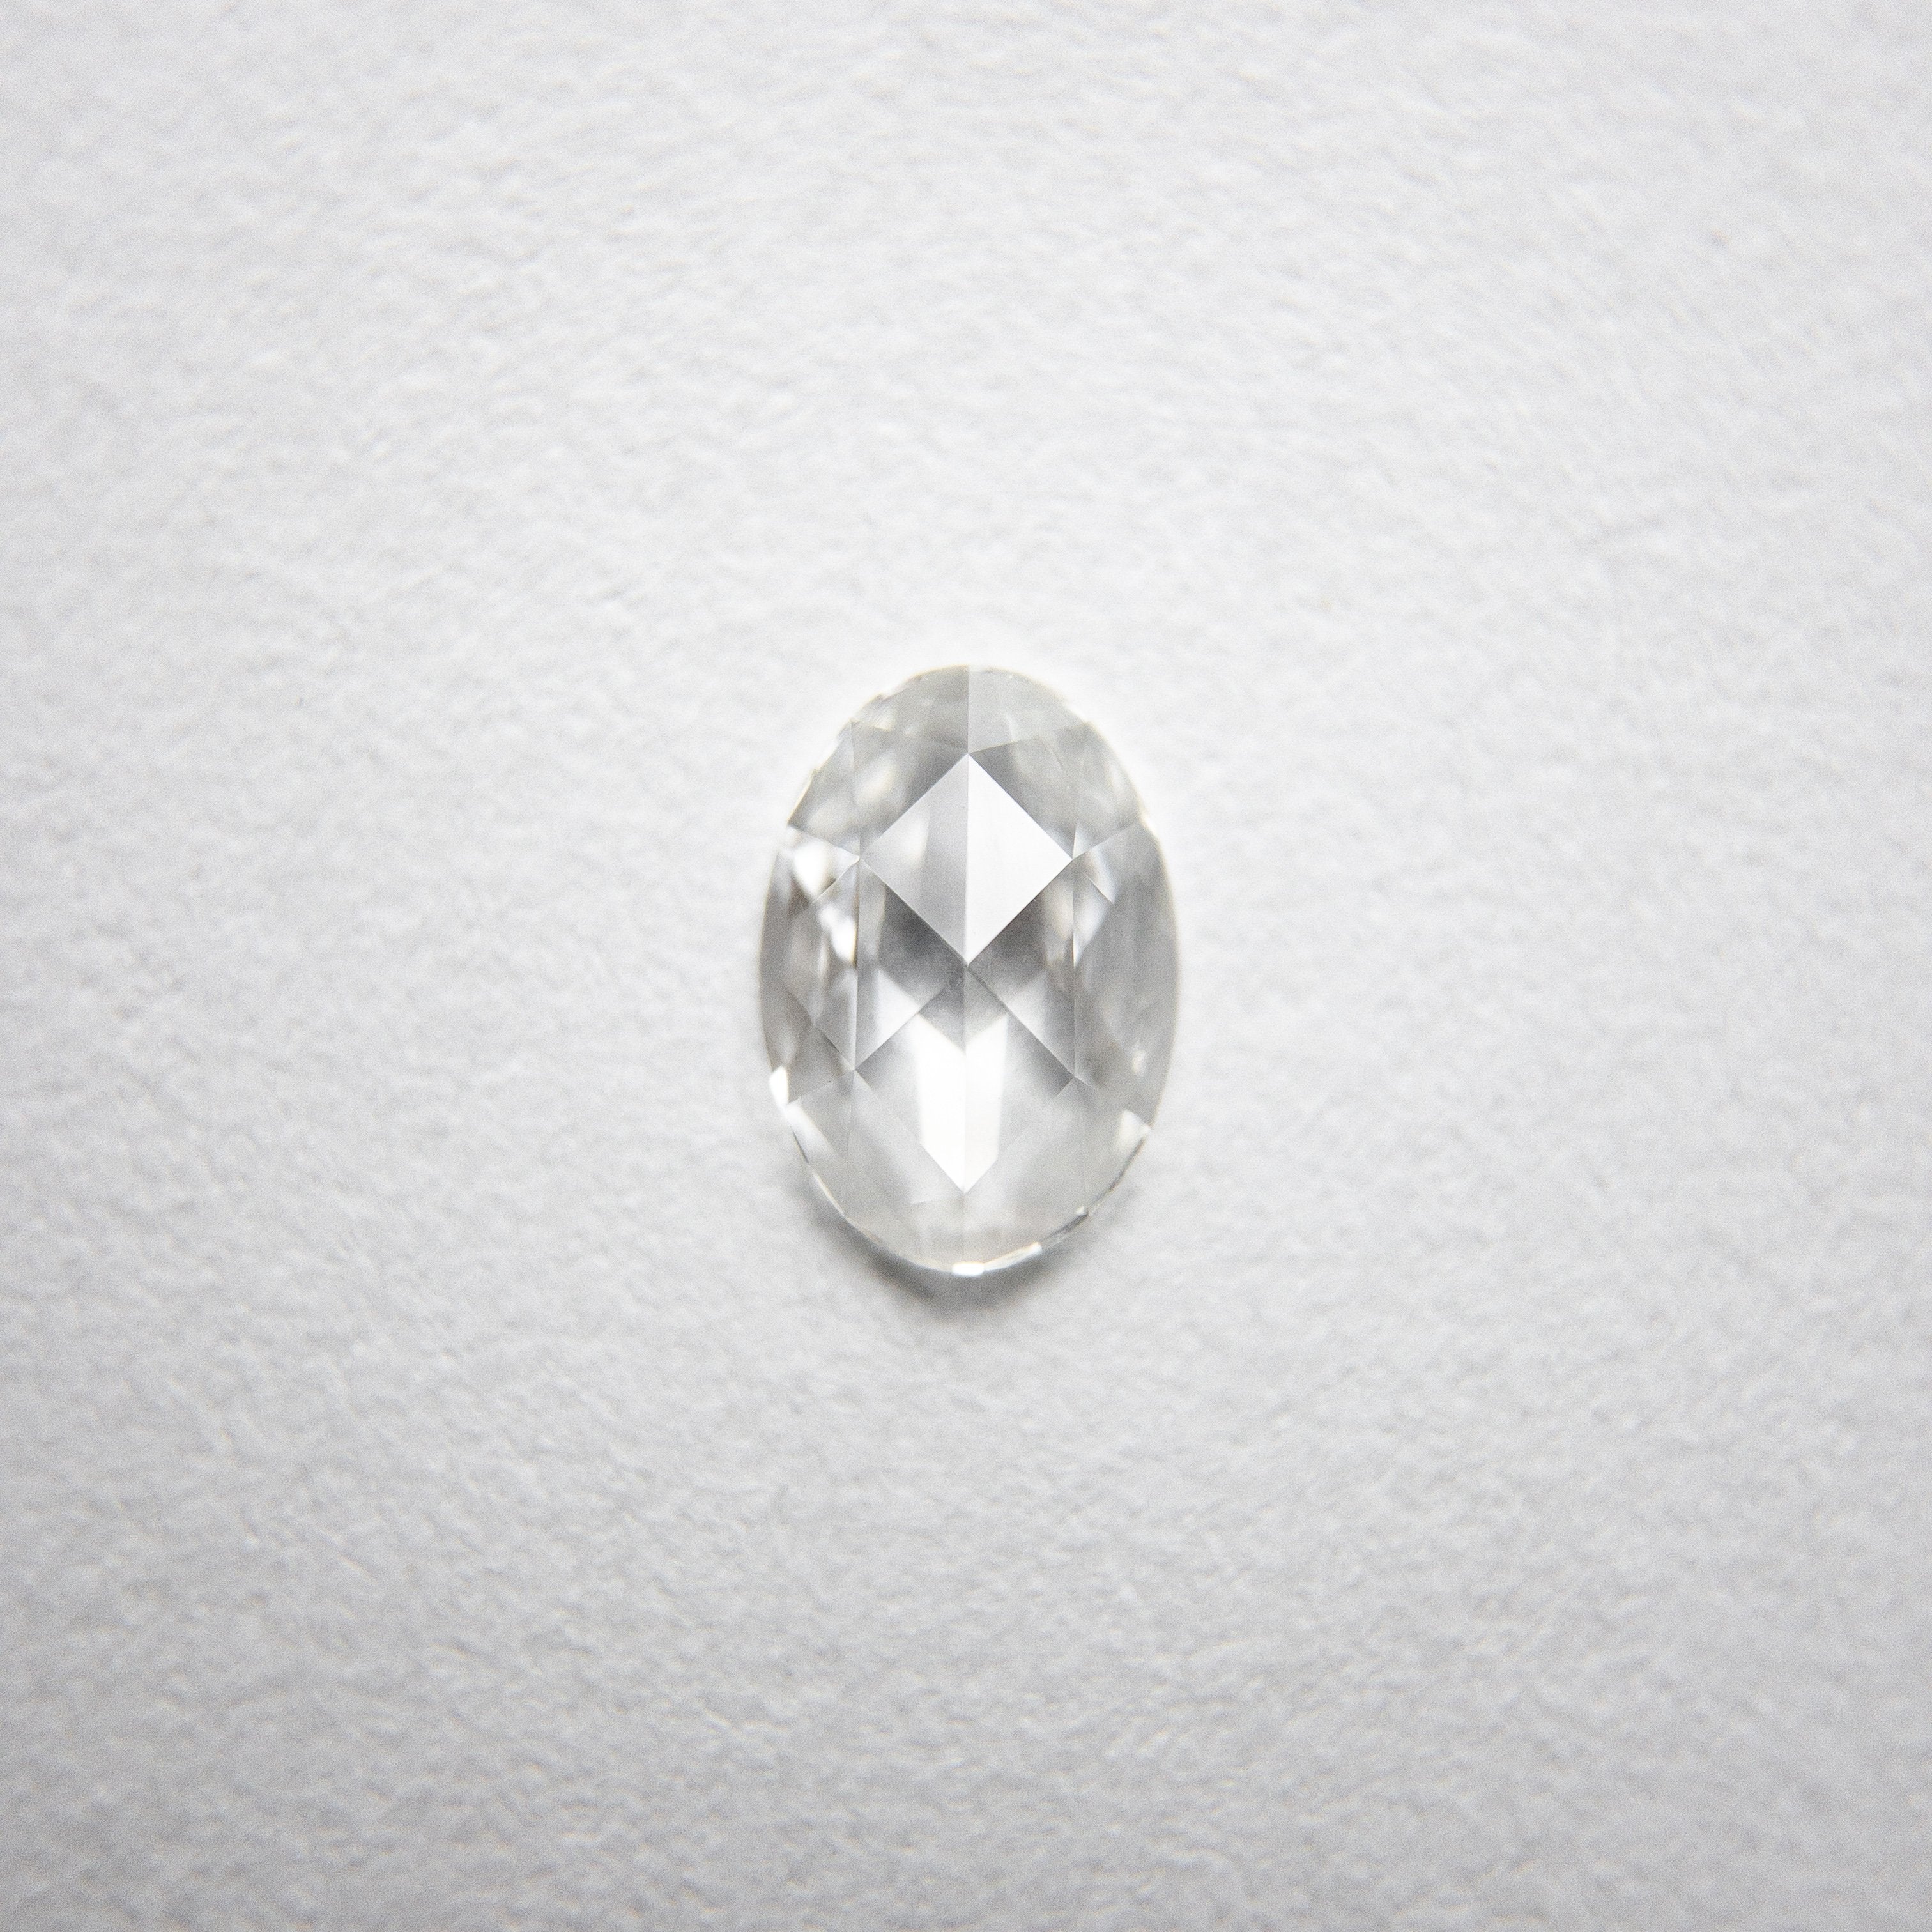 0.27ct 5.86x4.10x1.56mm Oval Rosecut 18238-01 HOLD D1338